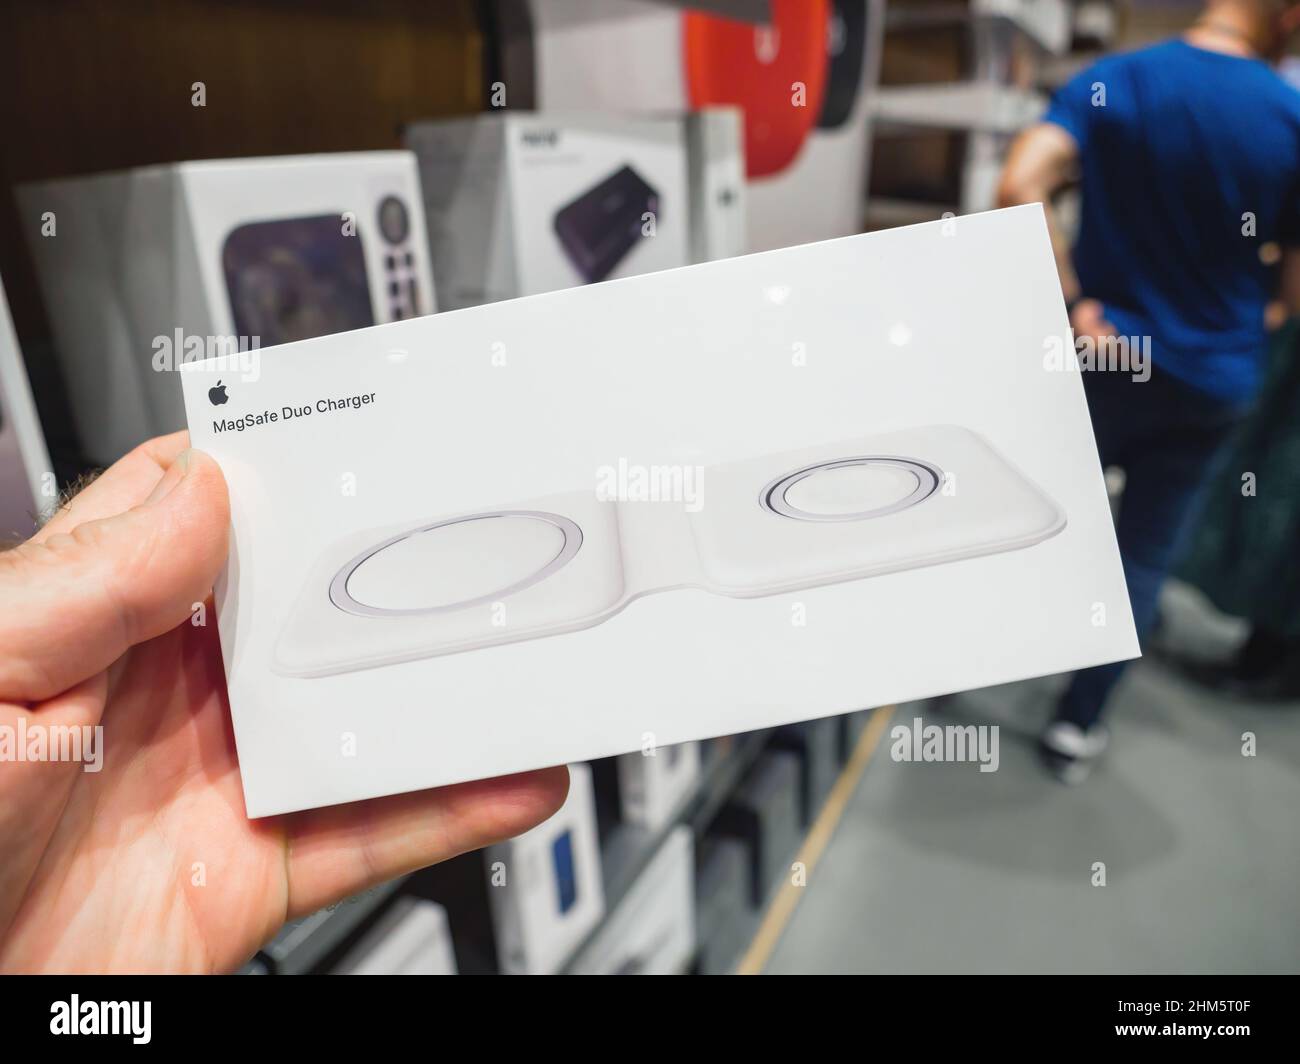 Paris, France - Sep 24, 2021: POV male hand holding new Apple Computers Mag Safe Duo Charger for iPhone and Apple Watch magnetic charger with customers defocused in background - accessory to charge wirelessly the iphone Stock Photo